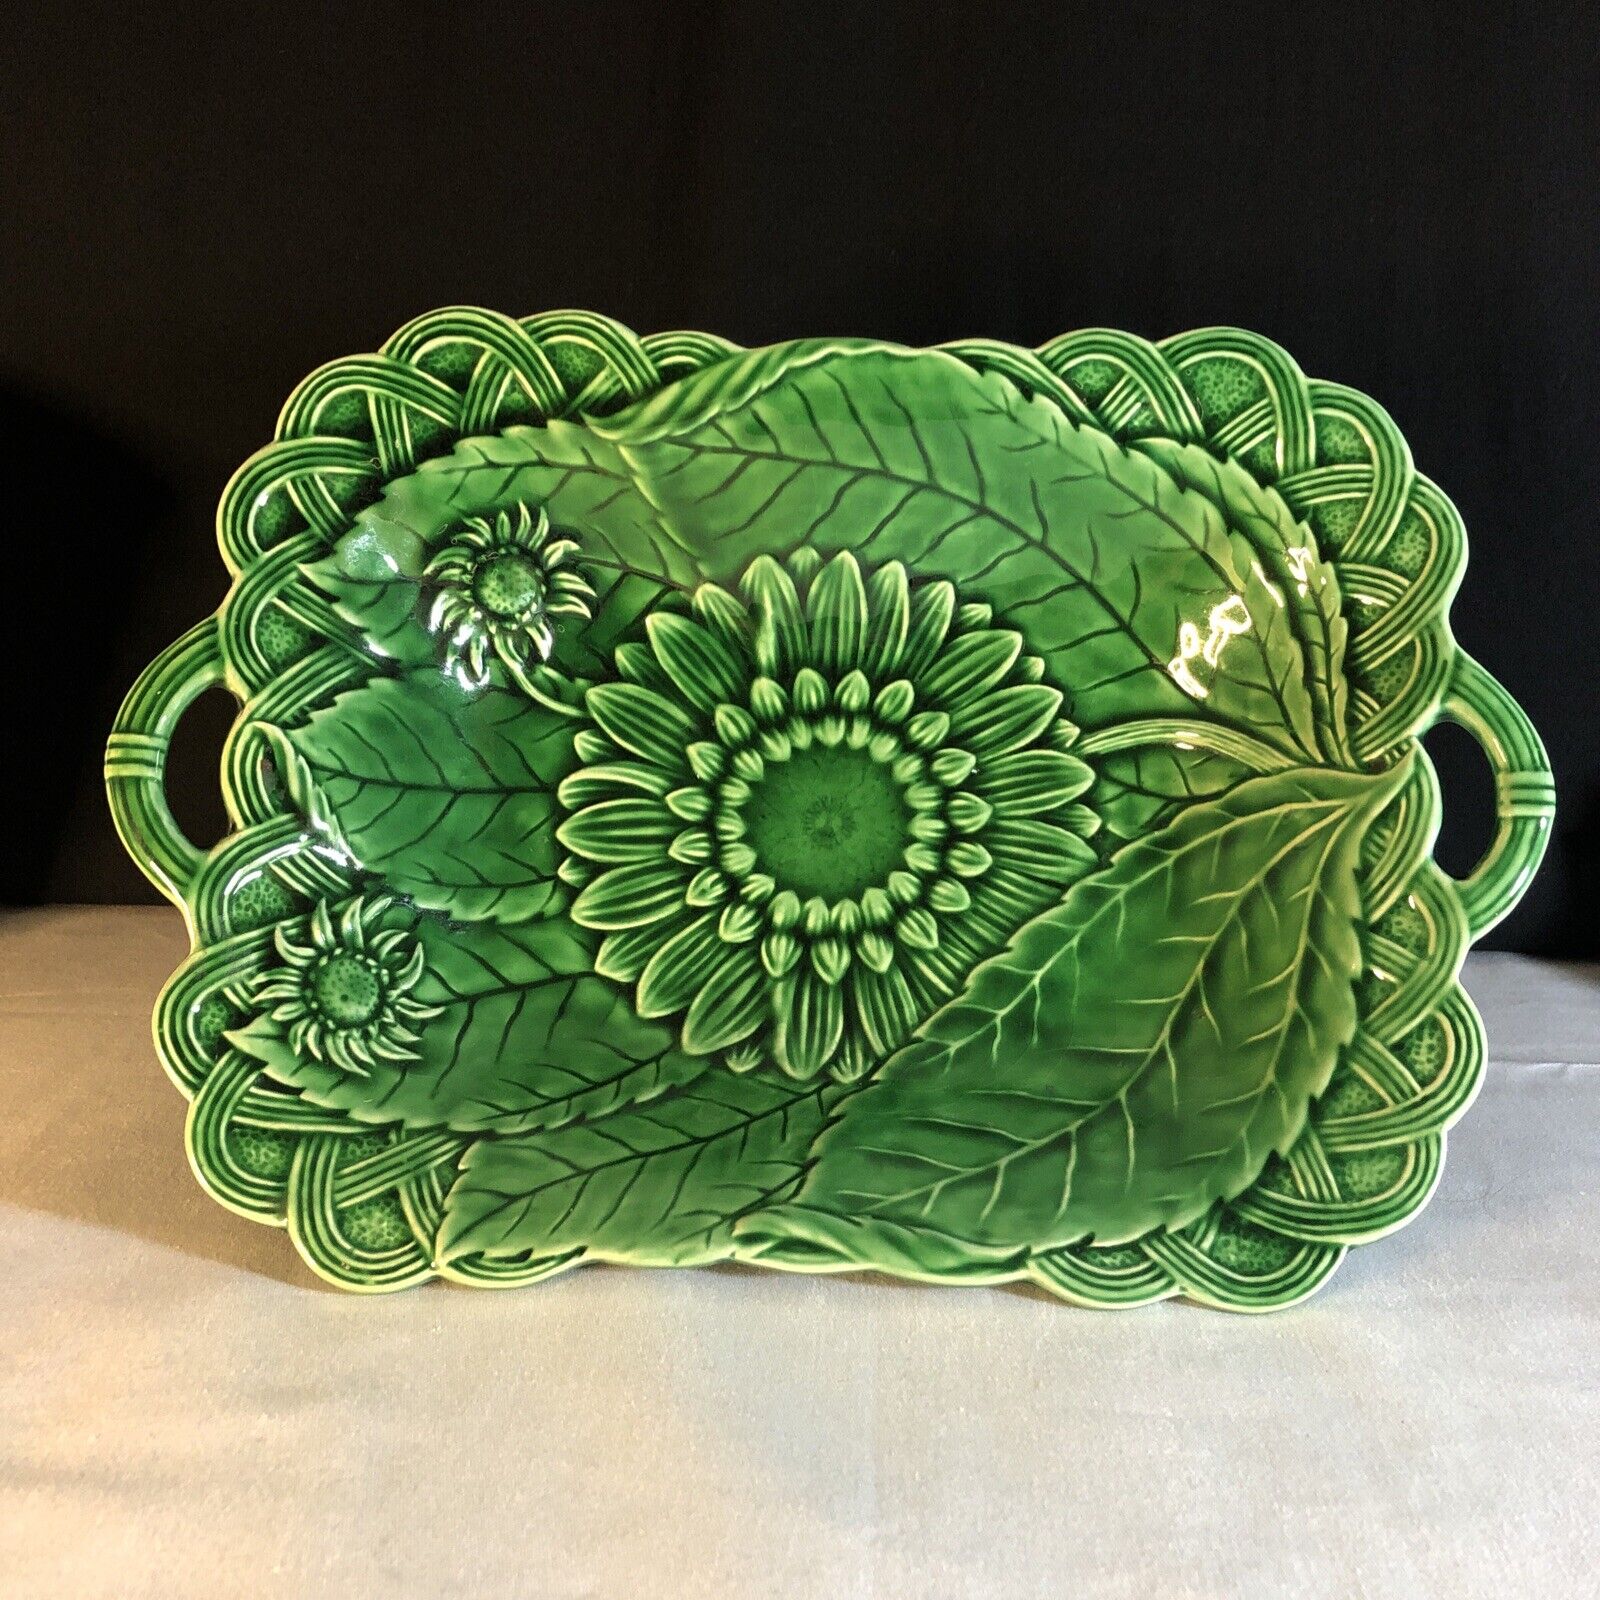 Green Majolica Style Footed Bowl By The Haldon Group Japan. Vintage 1983.